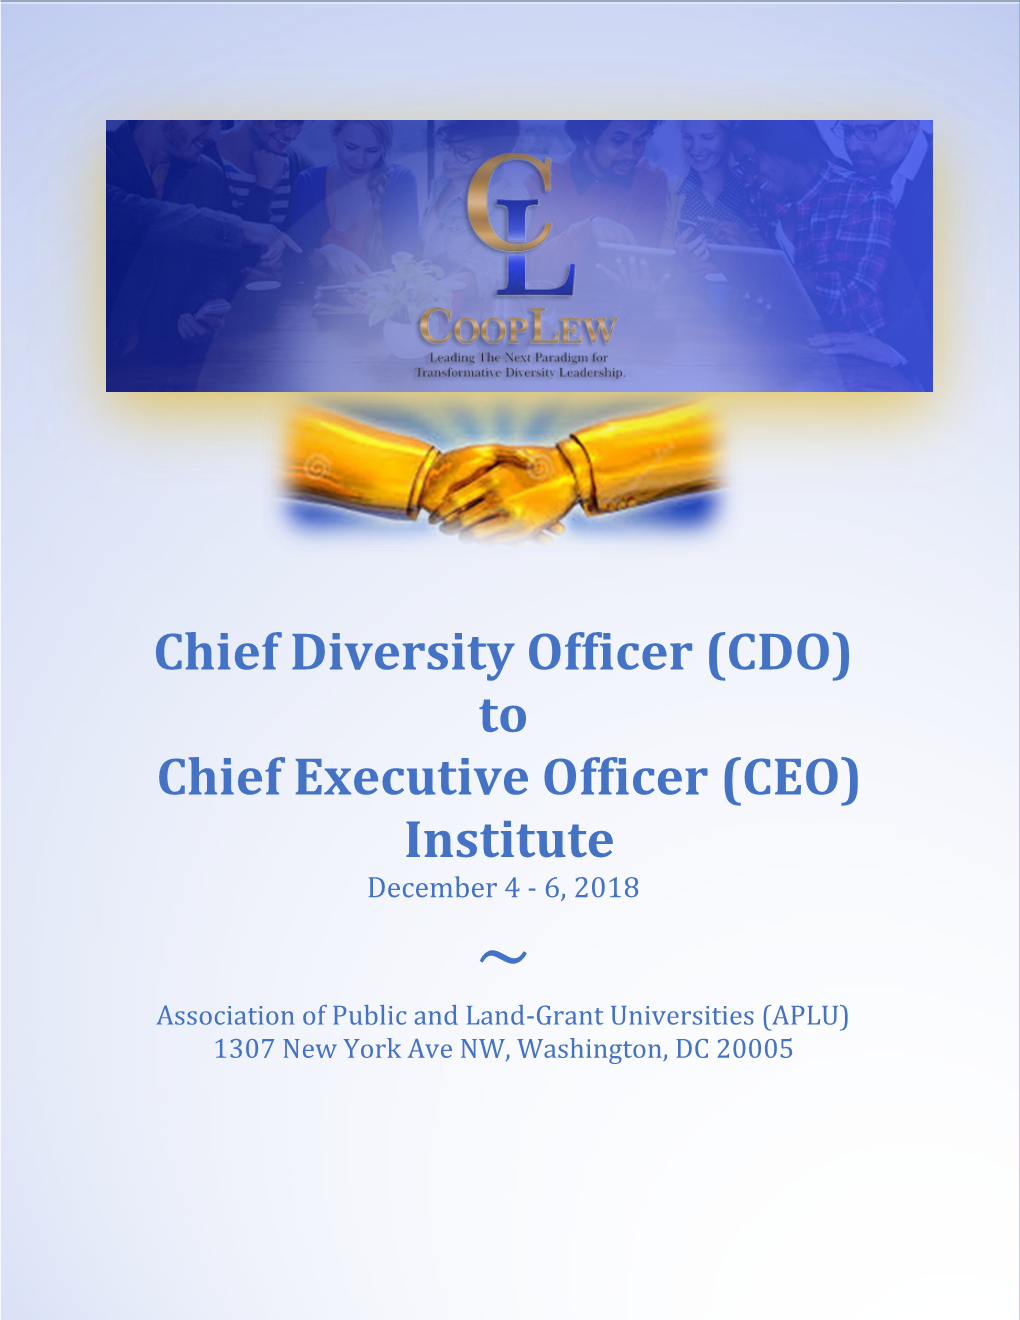 Chief Diversity Officer (CDO) to Chief Executive Officer (CEO) Institute